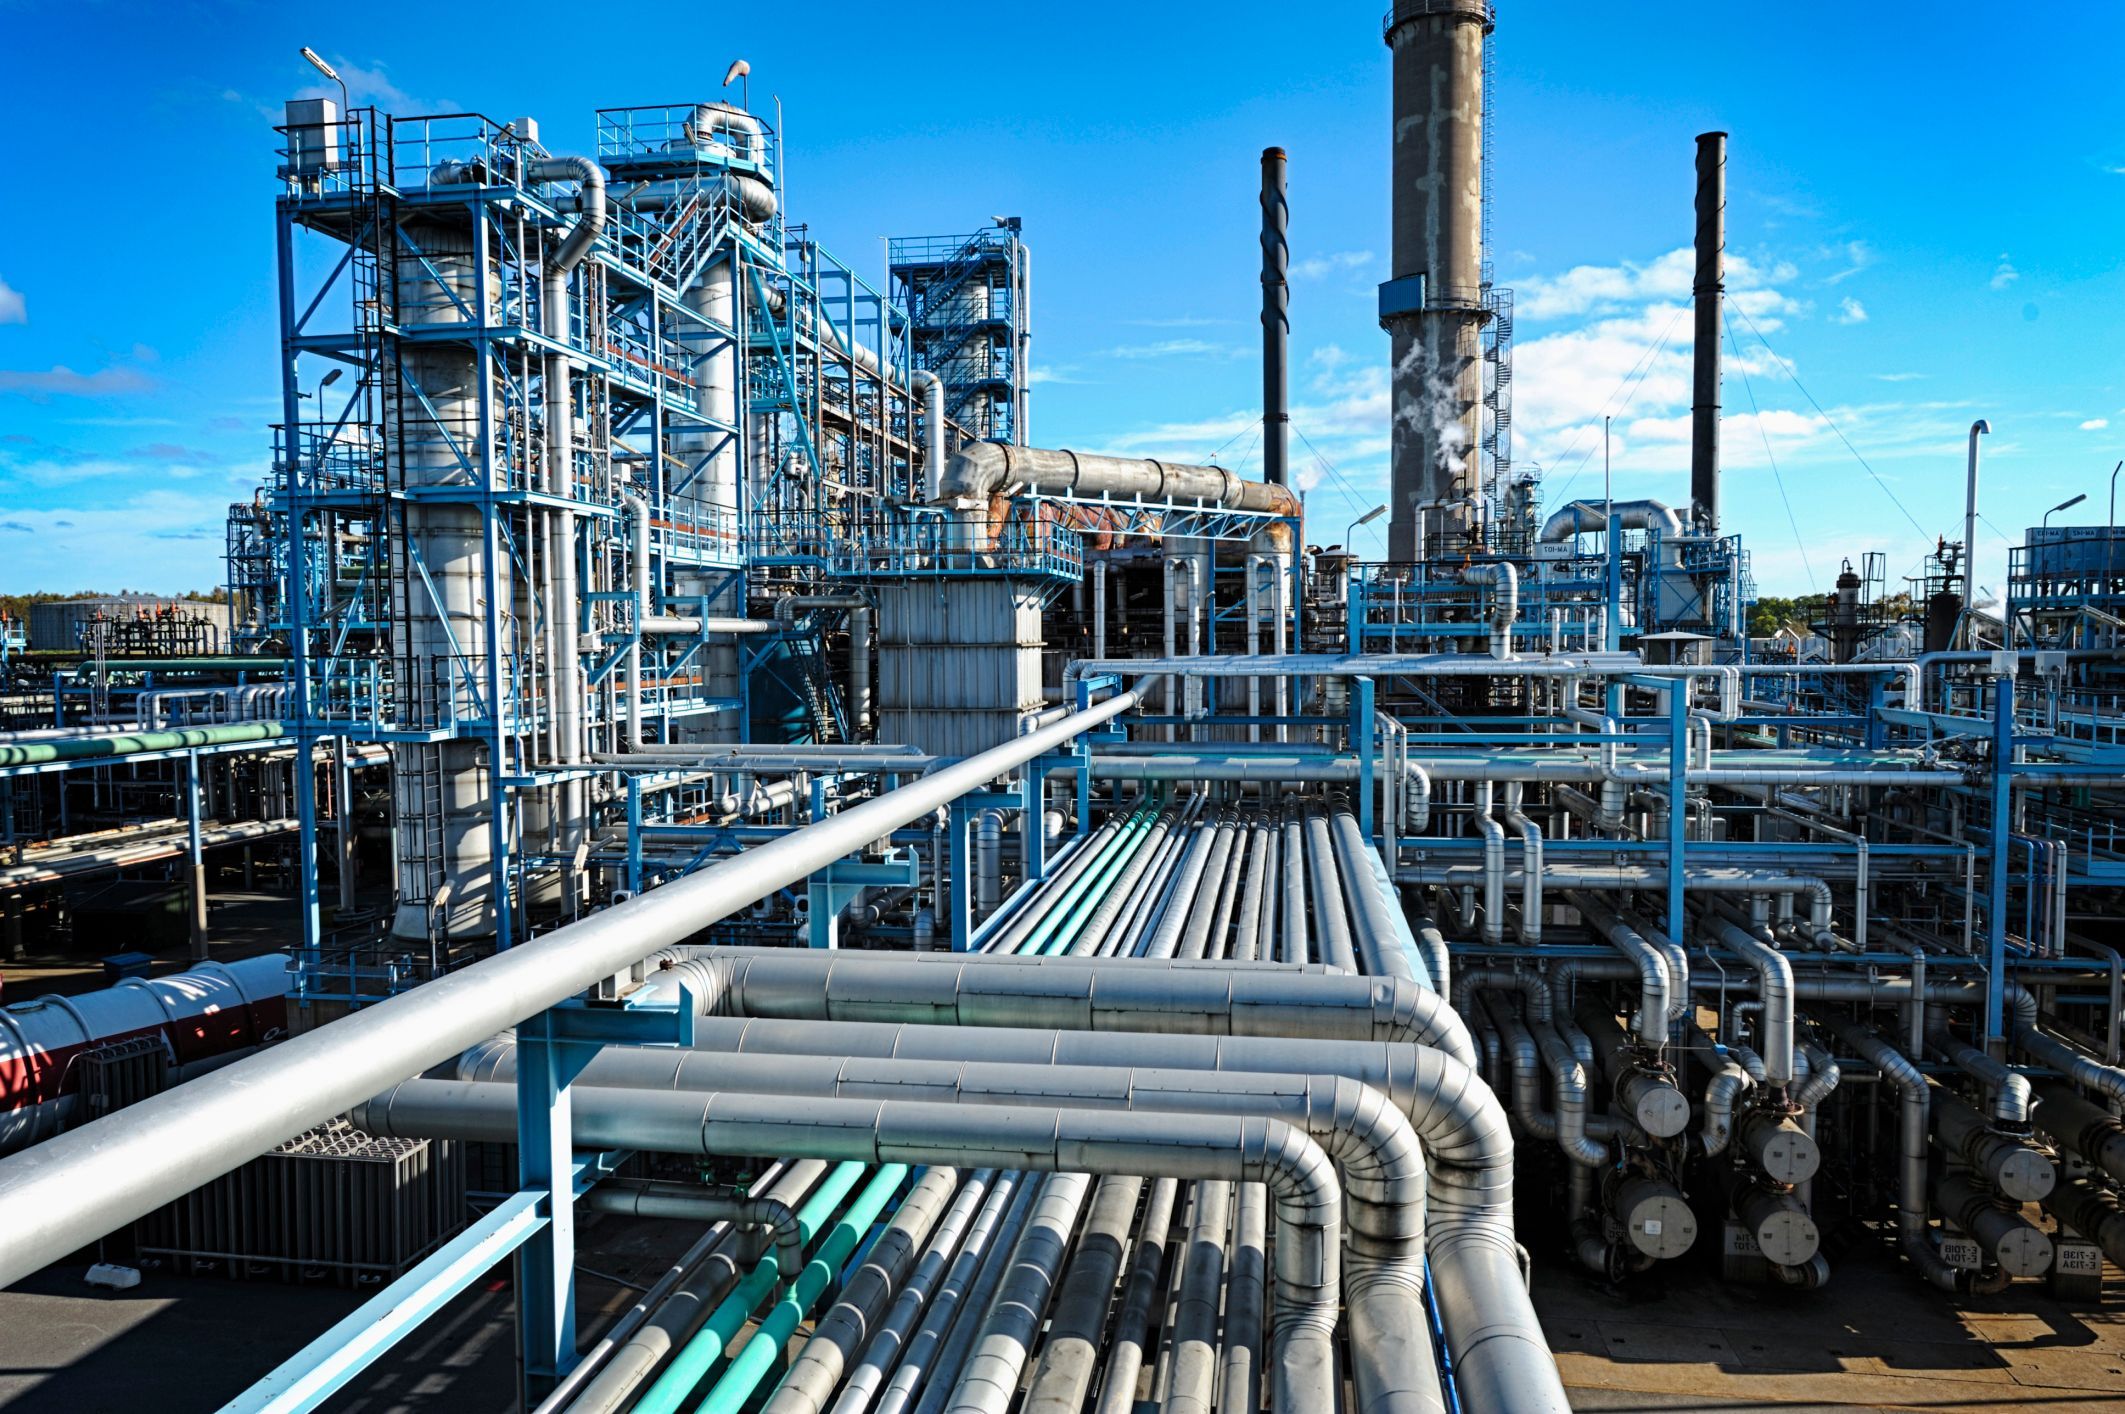 photograph of an oil refinery with pipes